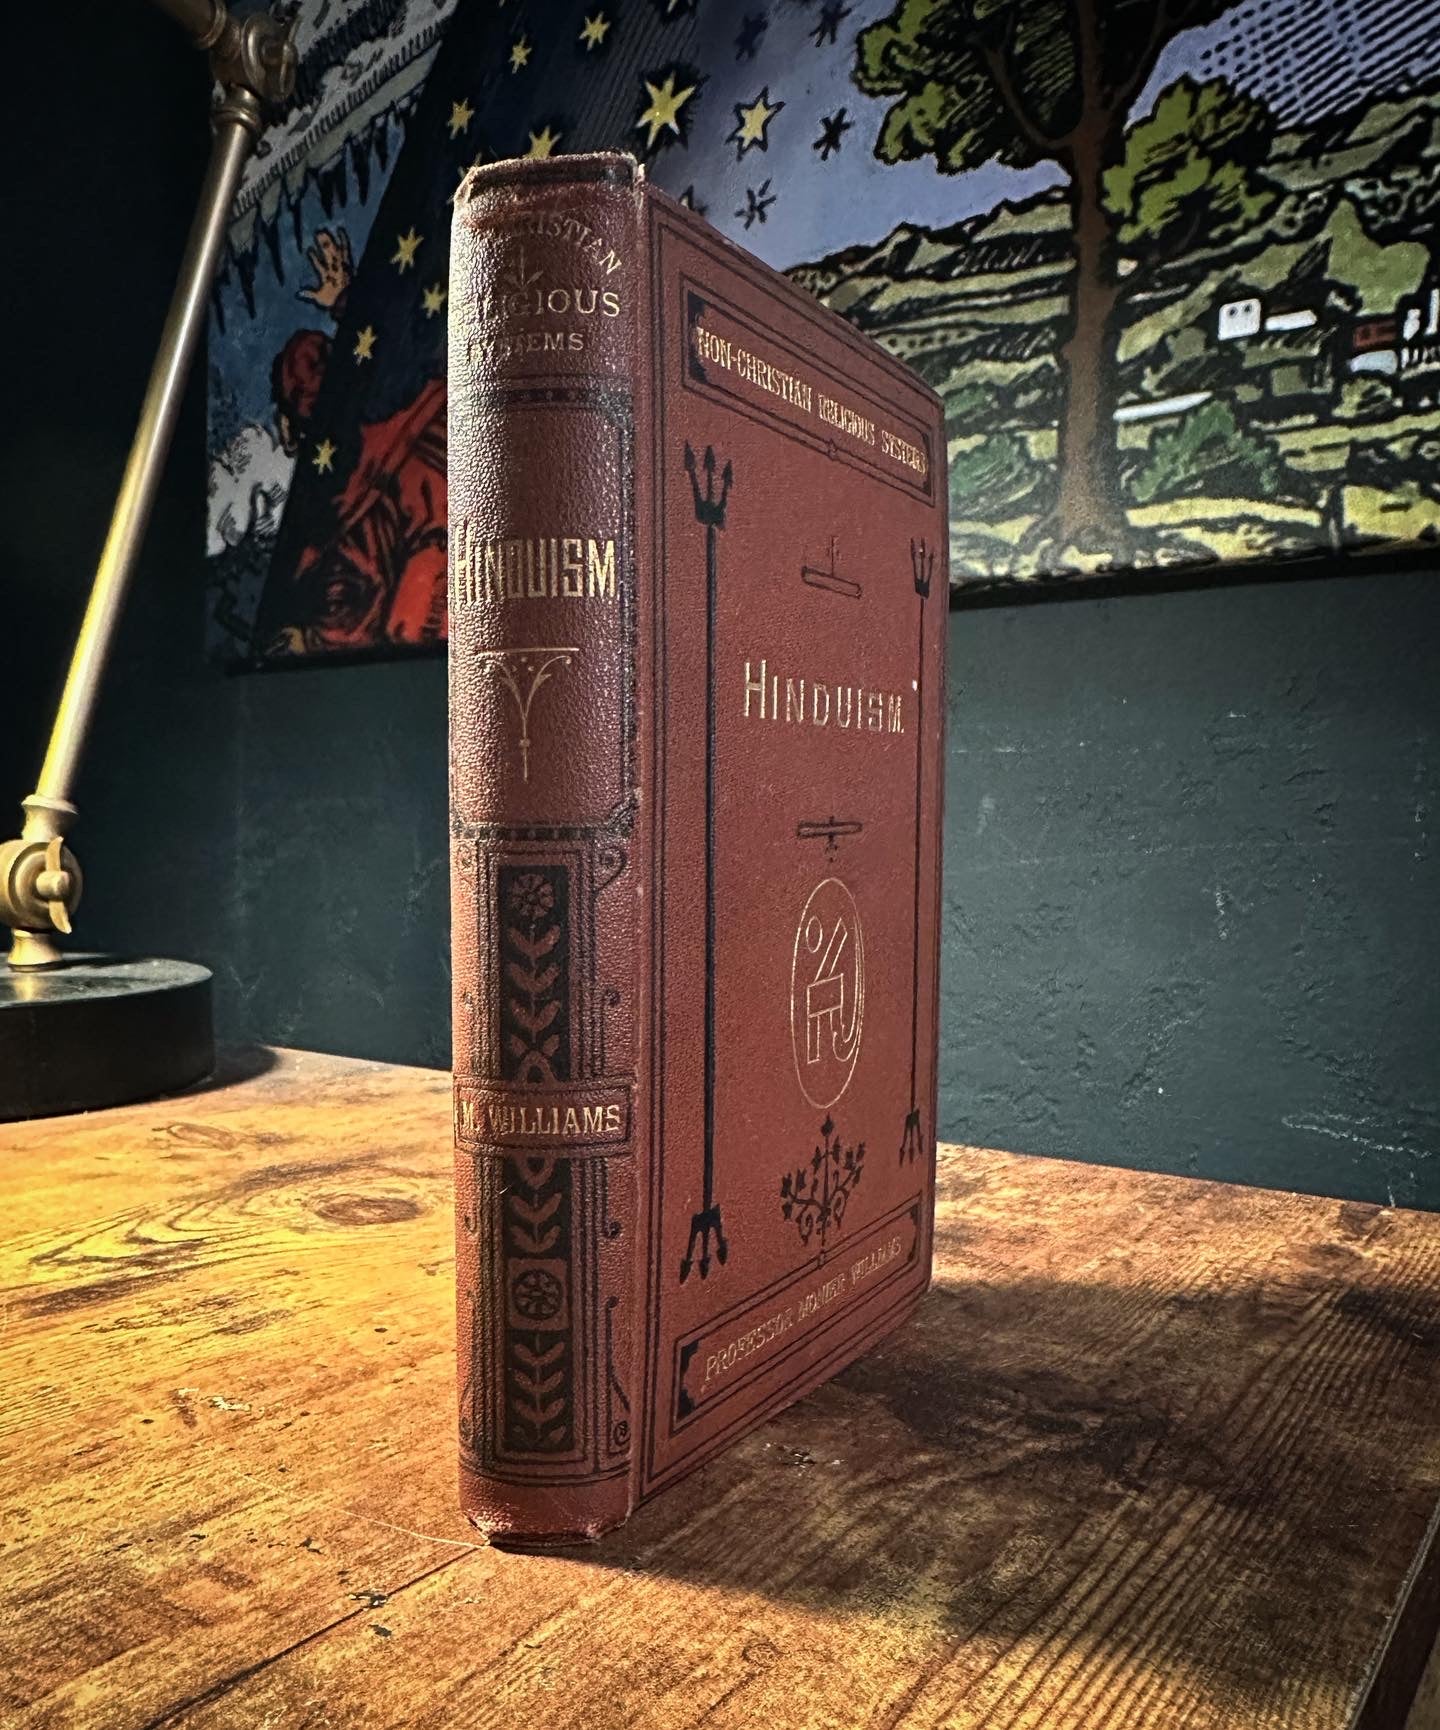 Hinduism (Non-Christian Religious Systems)1877 First Edition by Monier Williams M.A.